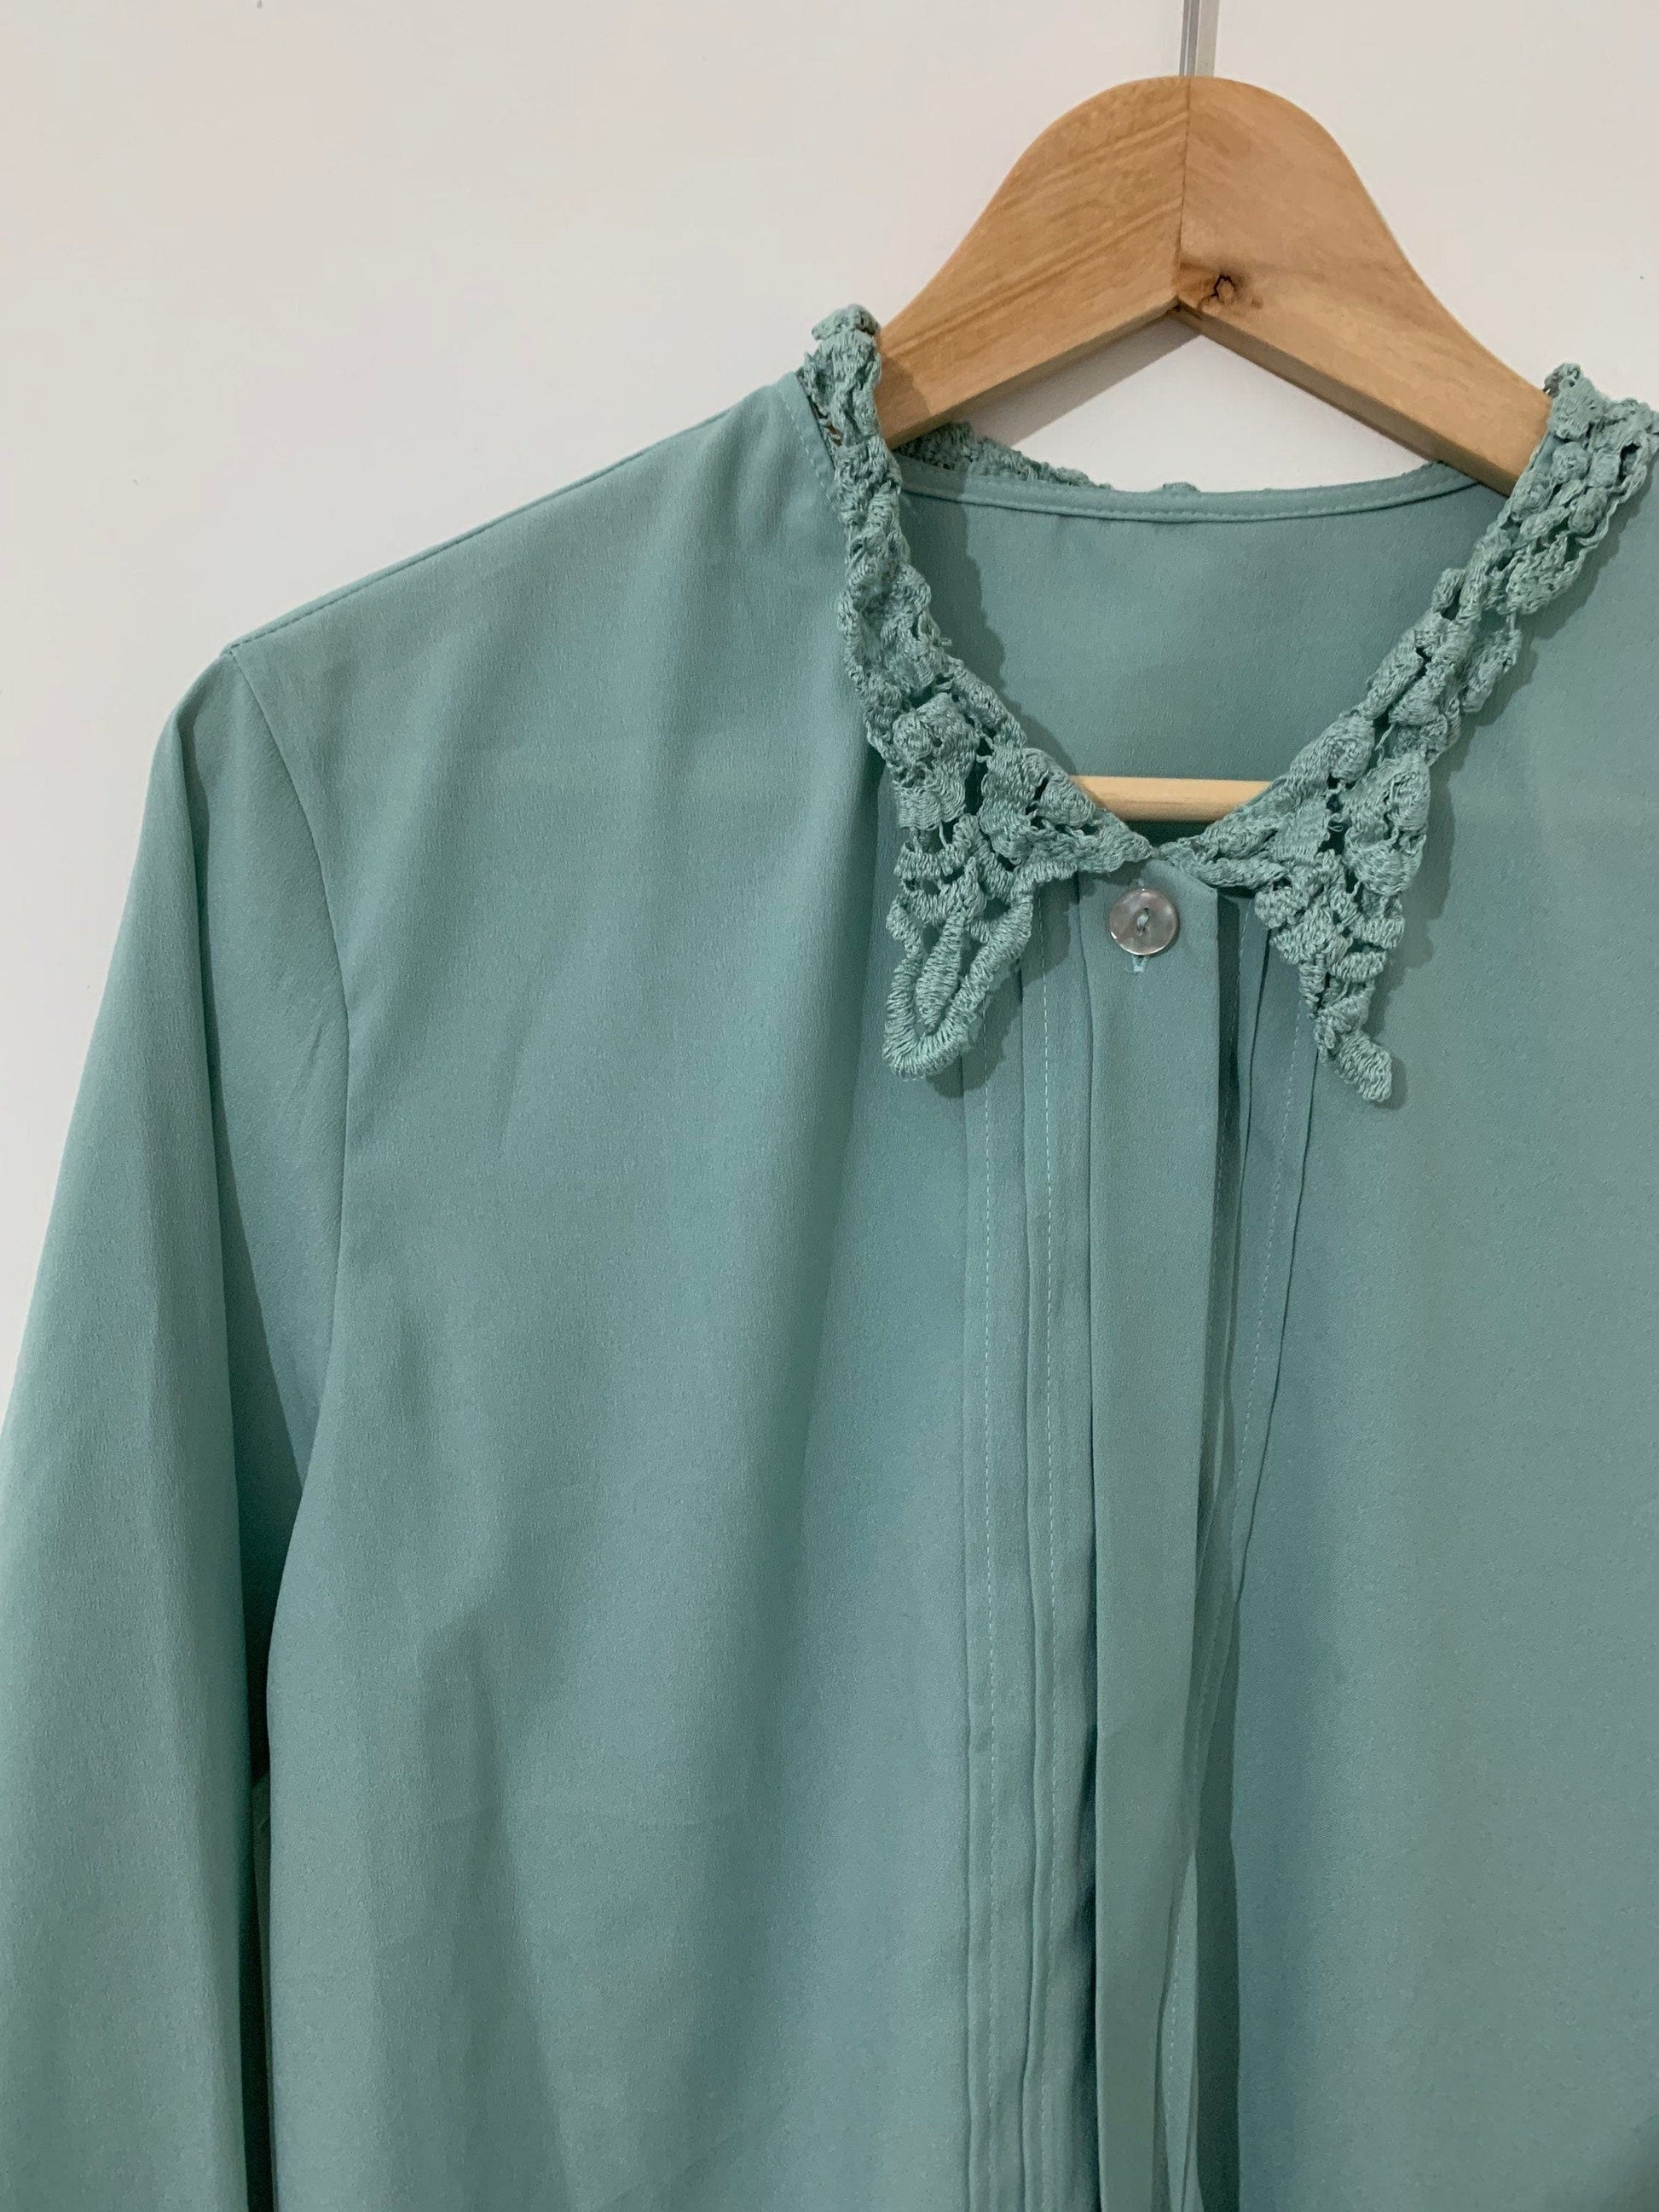 Vintage Green Blouse with Lace Collar Long Sleeves - Duck Egg Blue